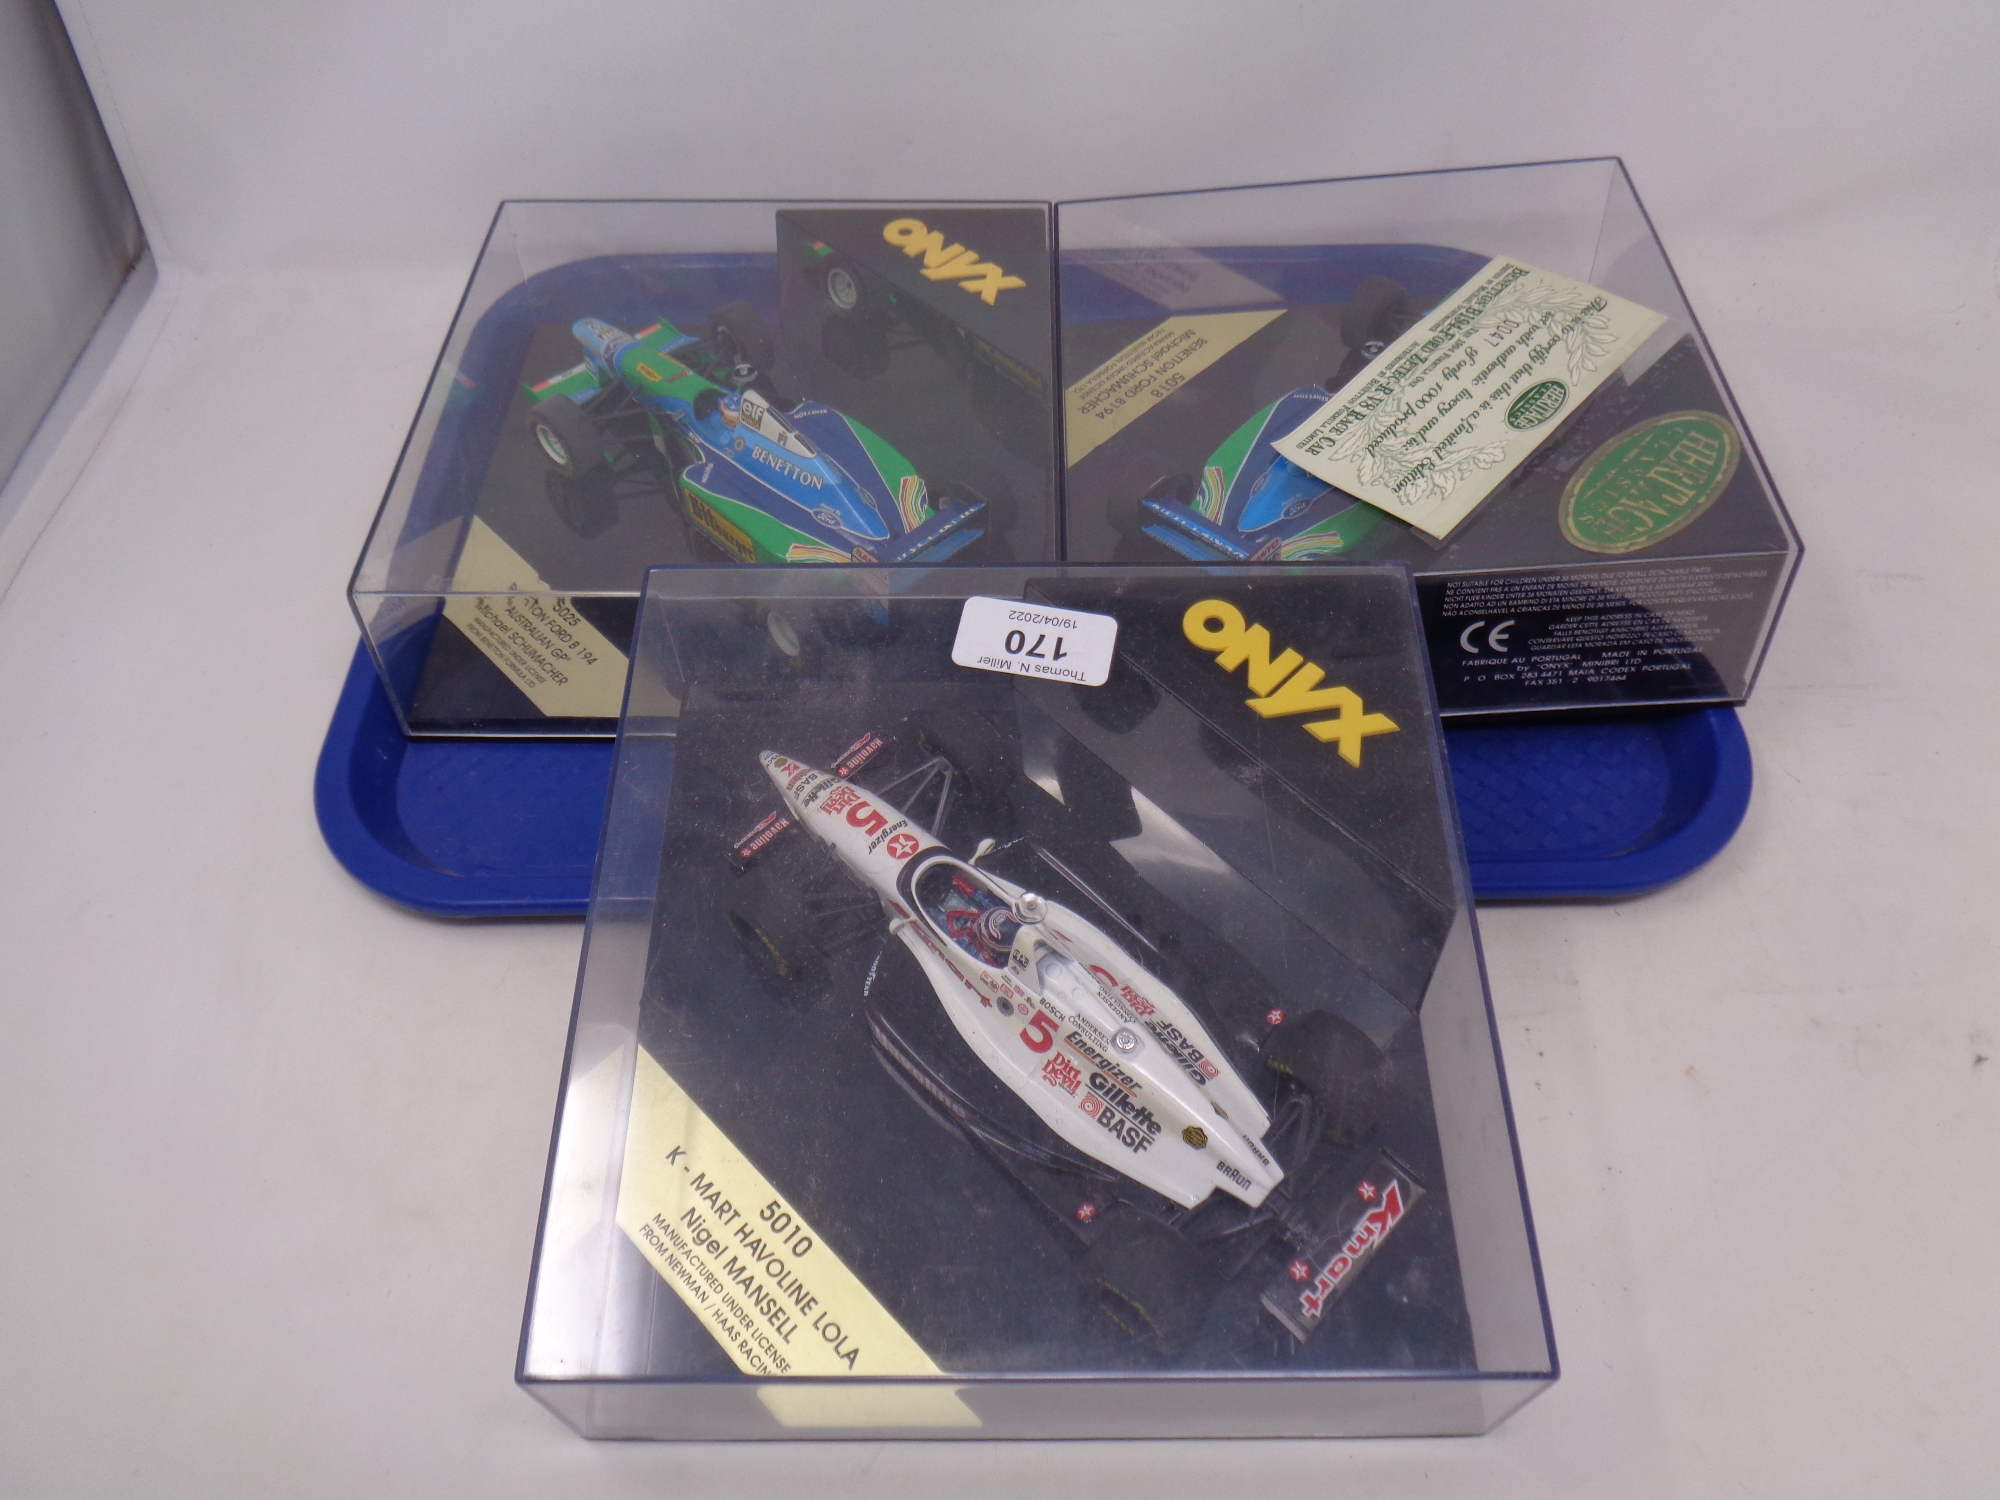 Three Onyx Formula 1 models in plastic display cases to include Michael Schumacher,